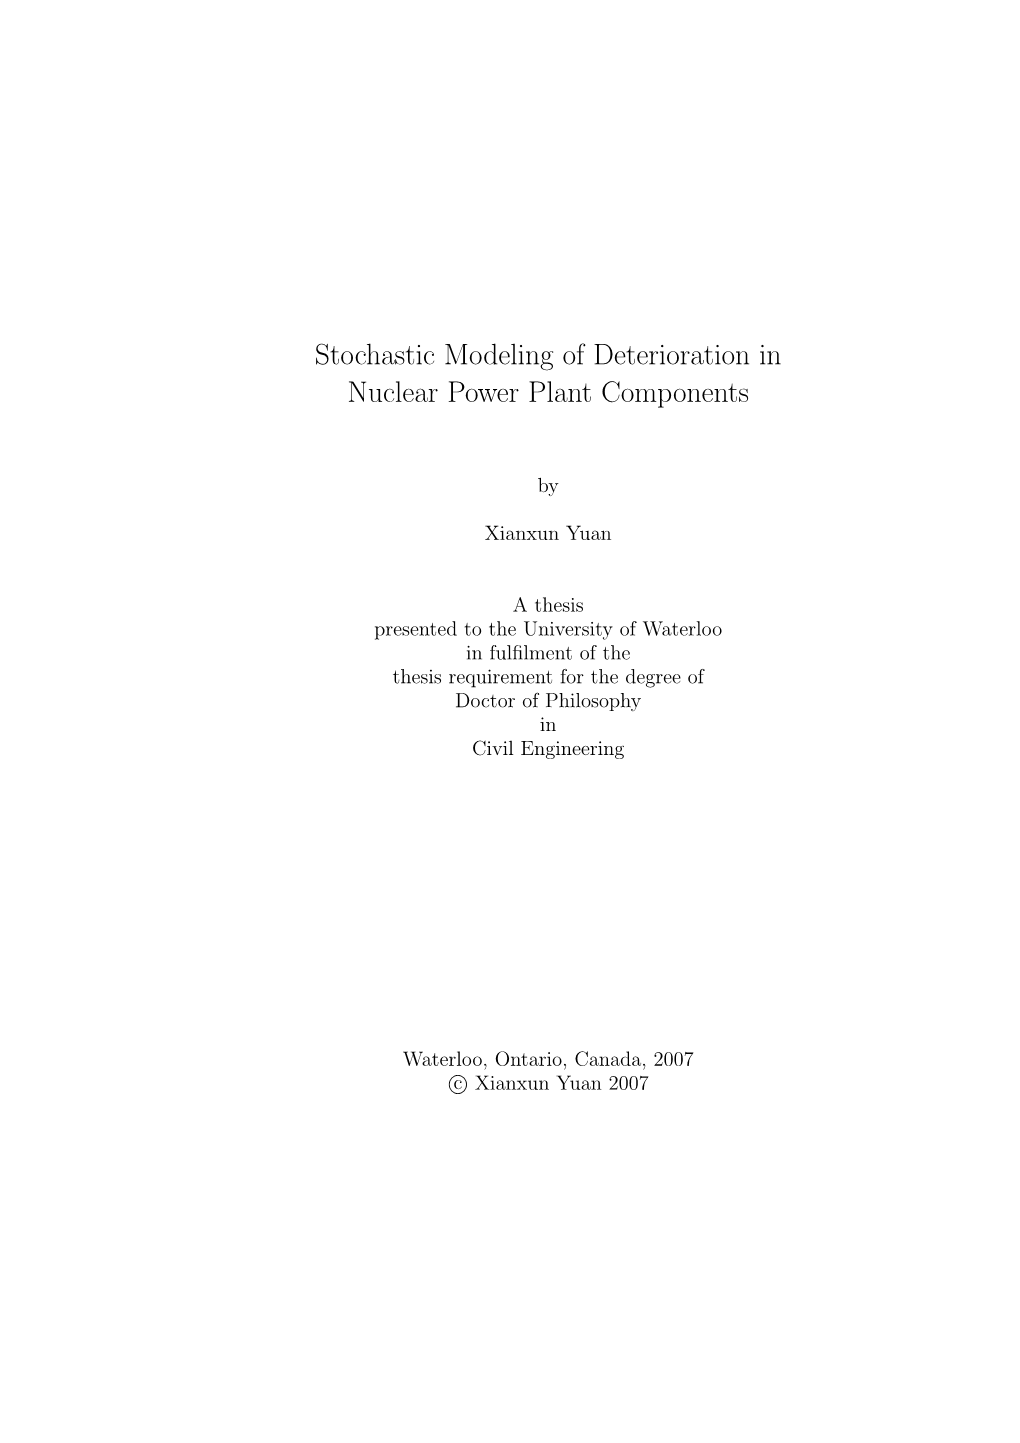 Stochastic Modeling of Deterioration in Nuclear Power Plant Components